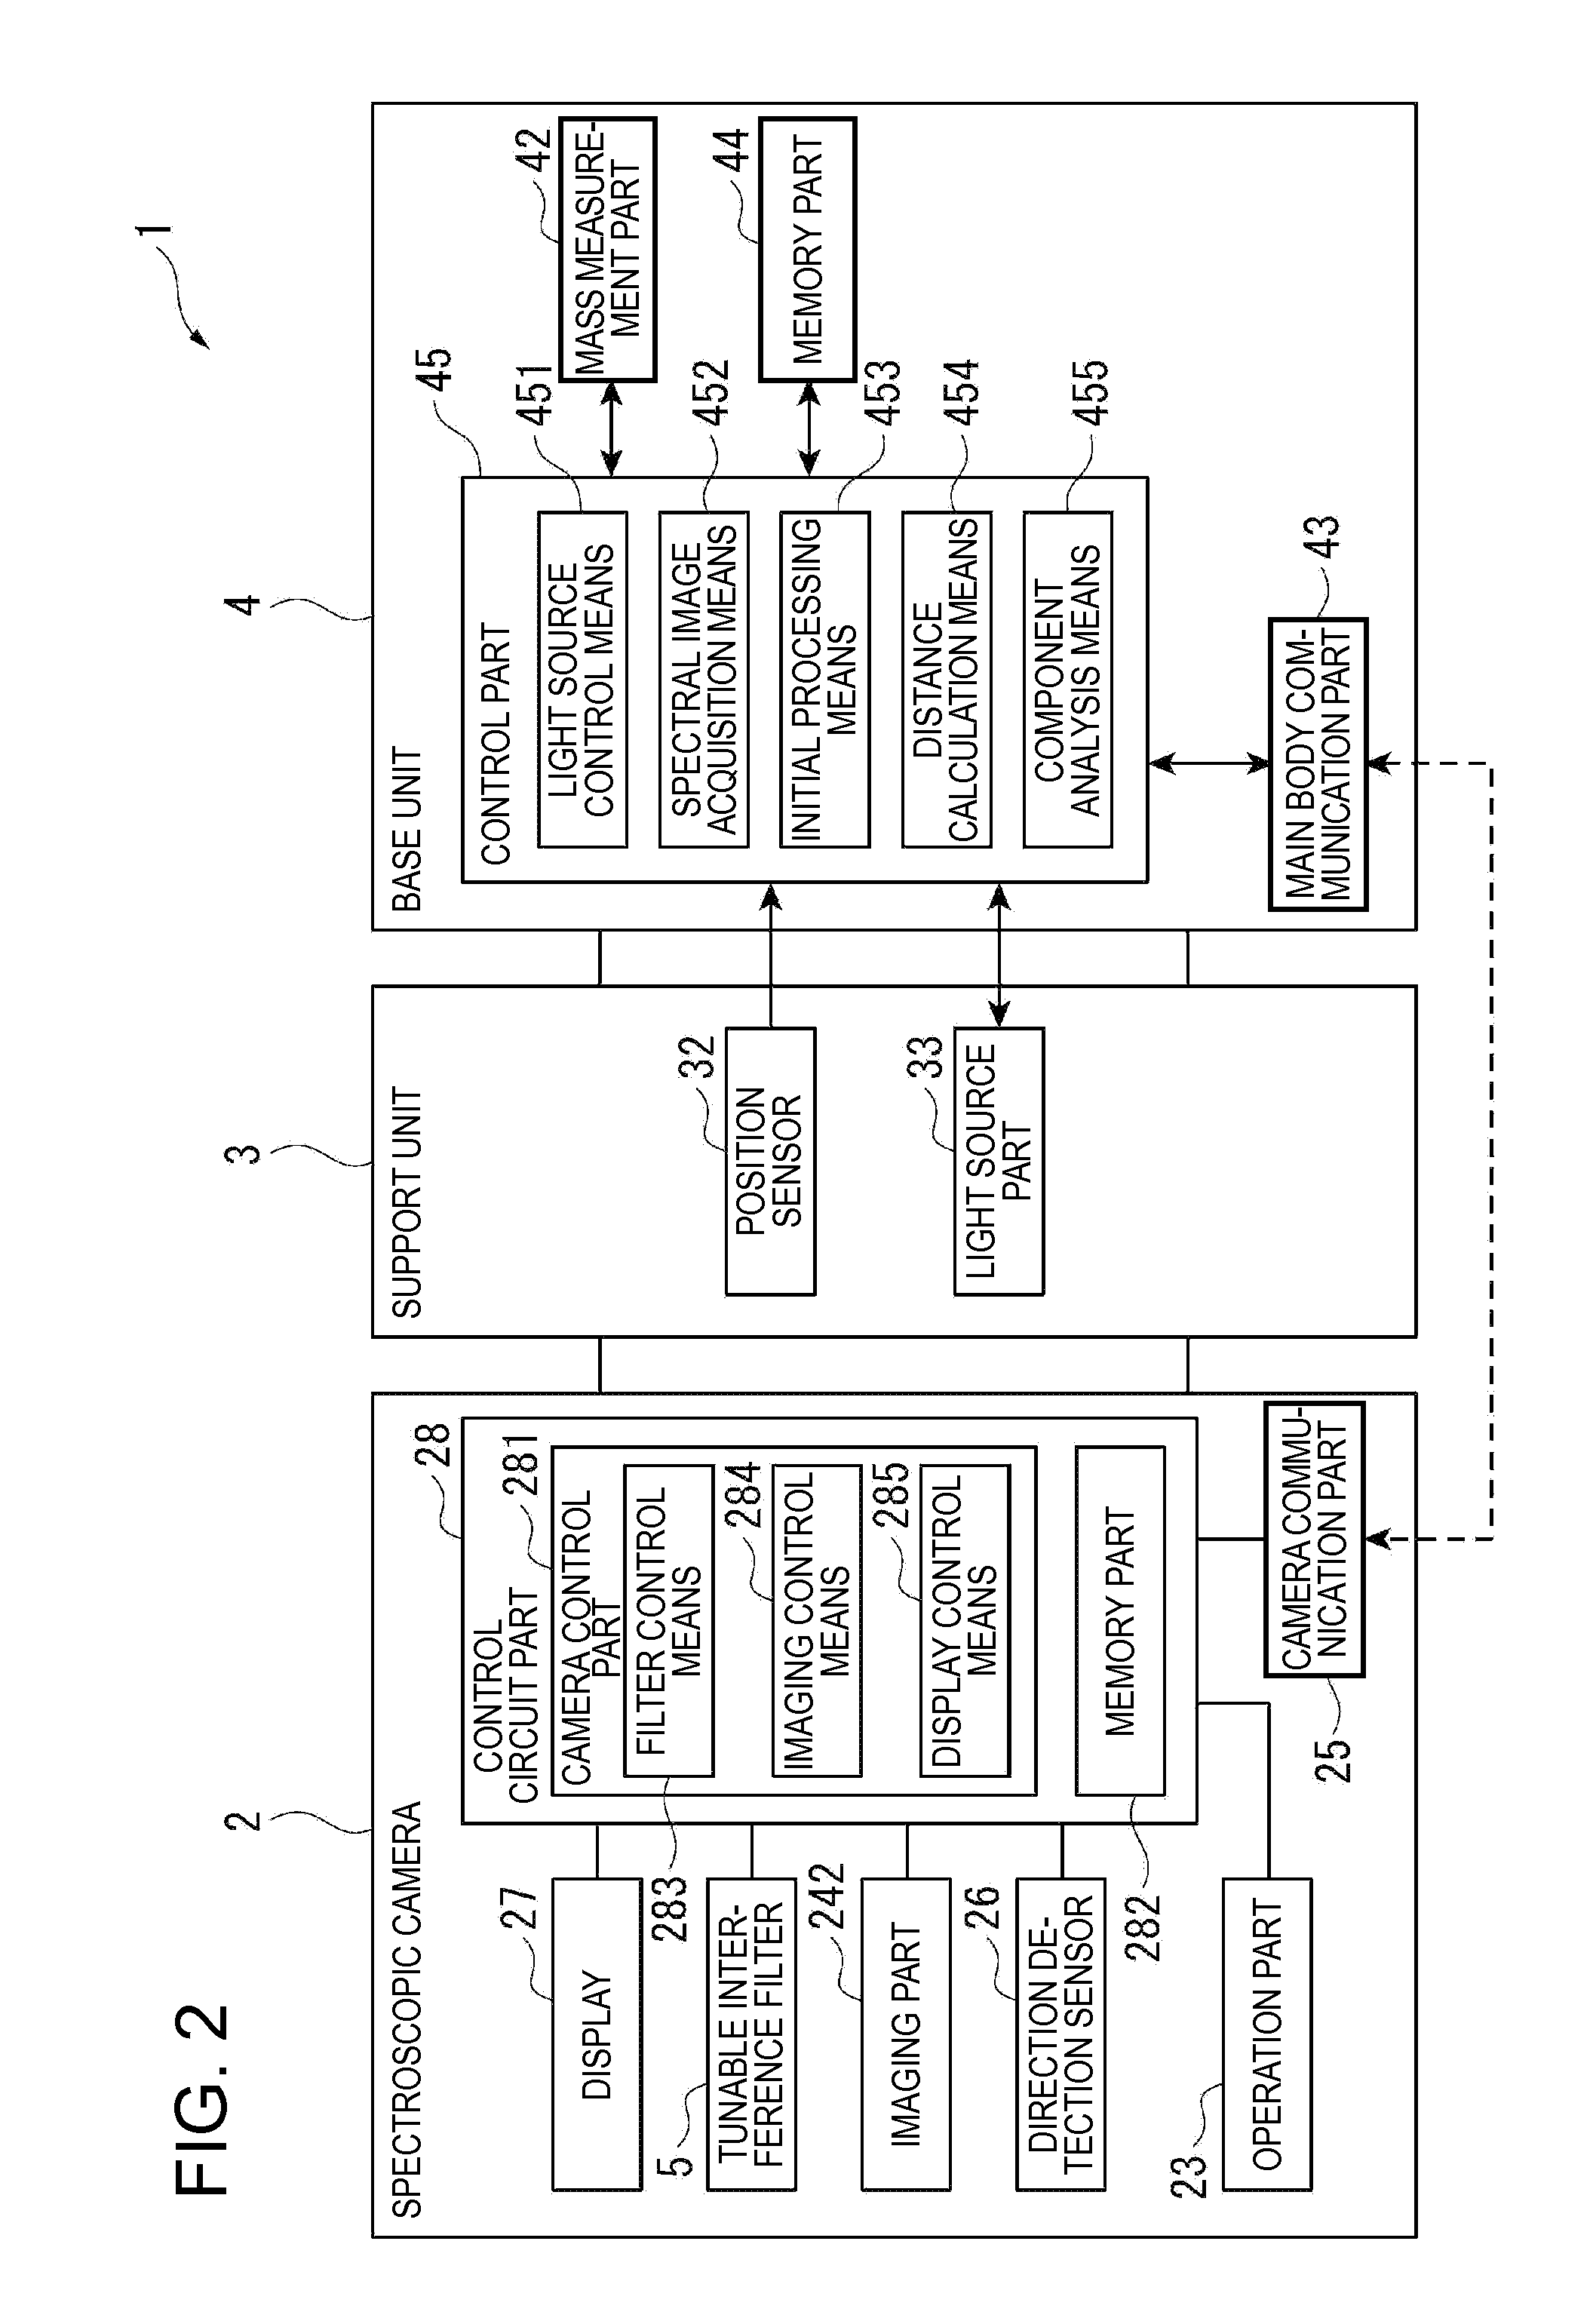 Component analyzing apparatus